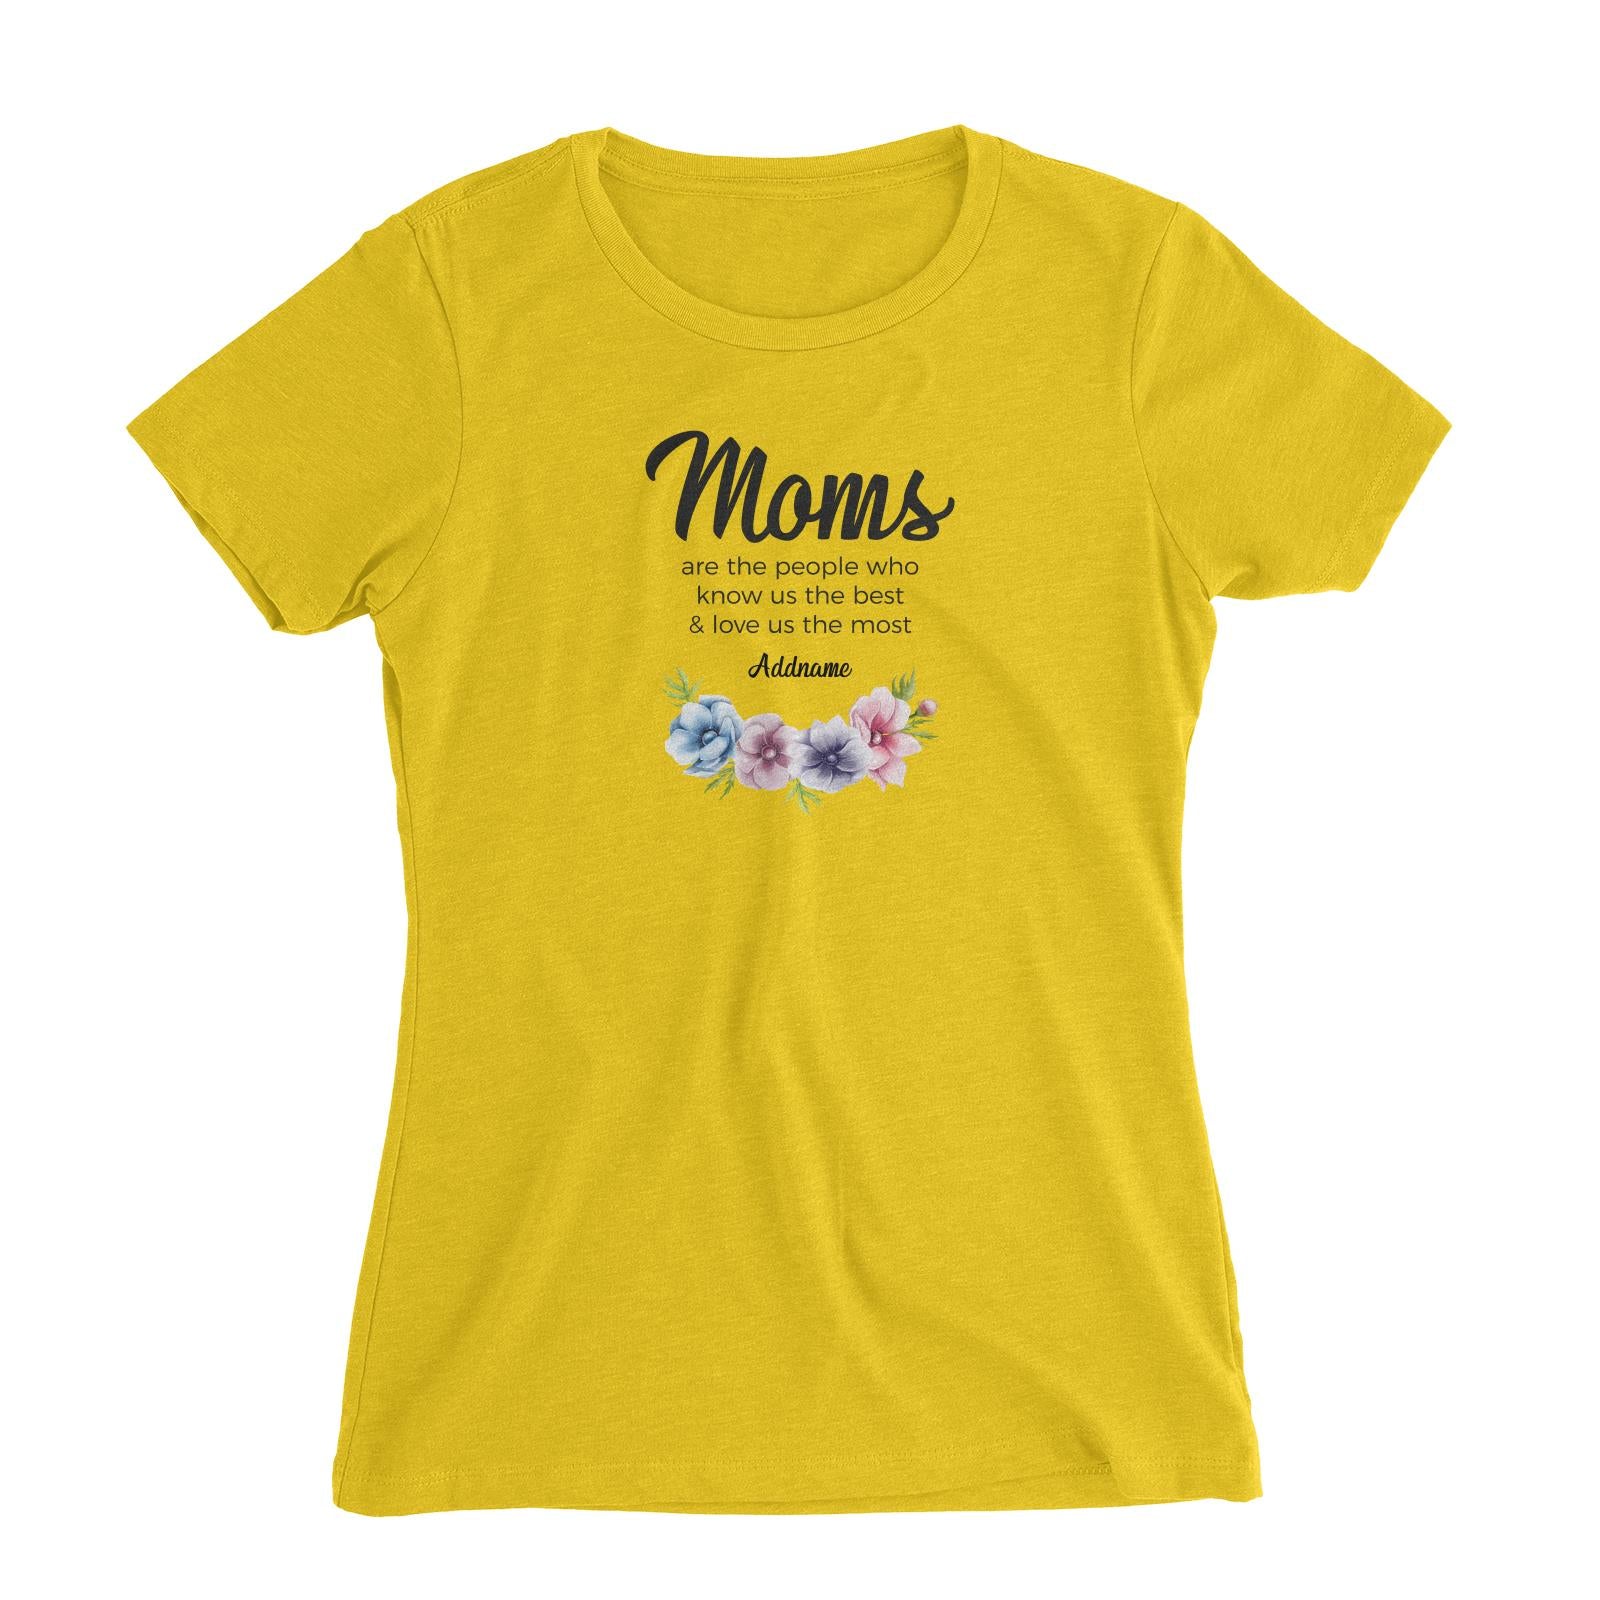 Sweet Mom Quotes 1 Moms Are The People Who Know Us The Best & Love Us The Most Addname Women's Slim Fit T-Shirt